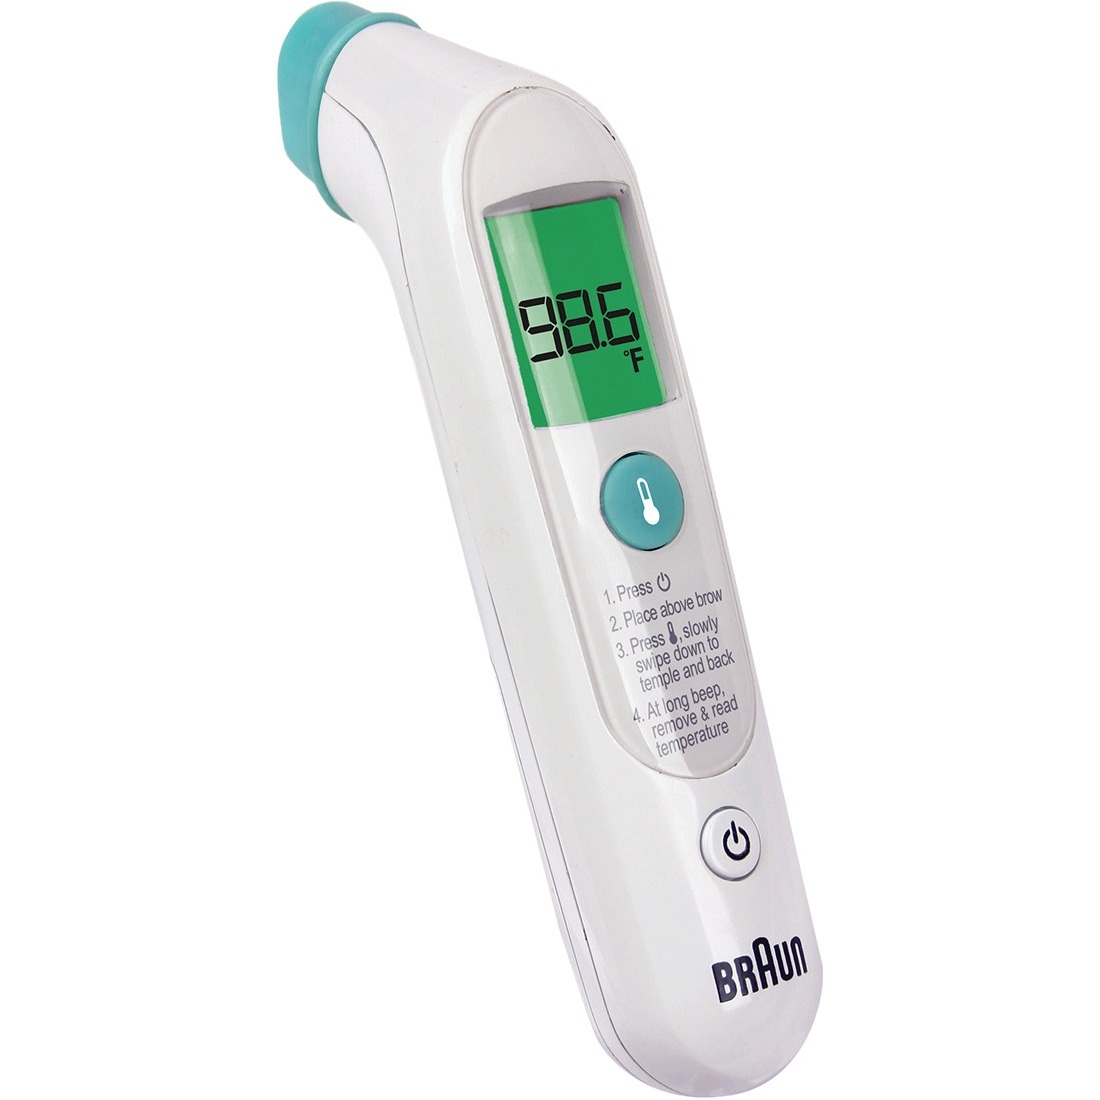 Braun Forehead Thermometer FHT1000US, White - image 1 of 2